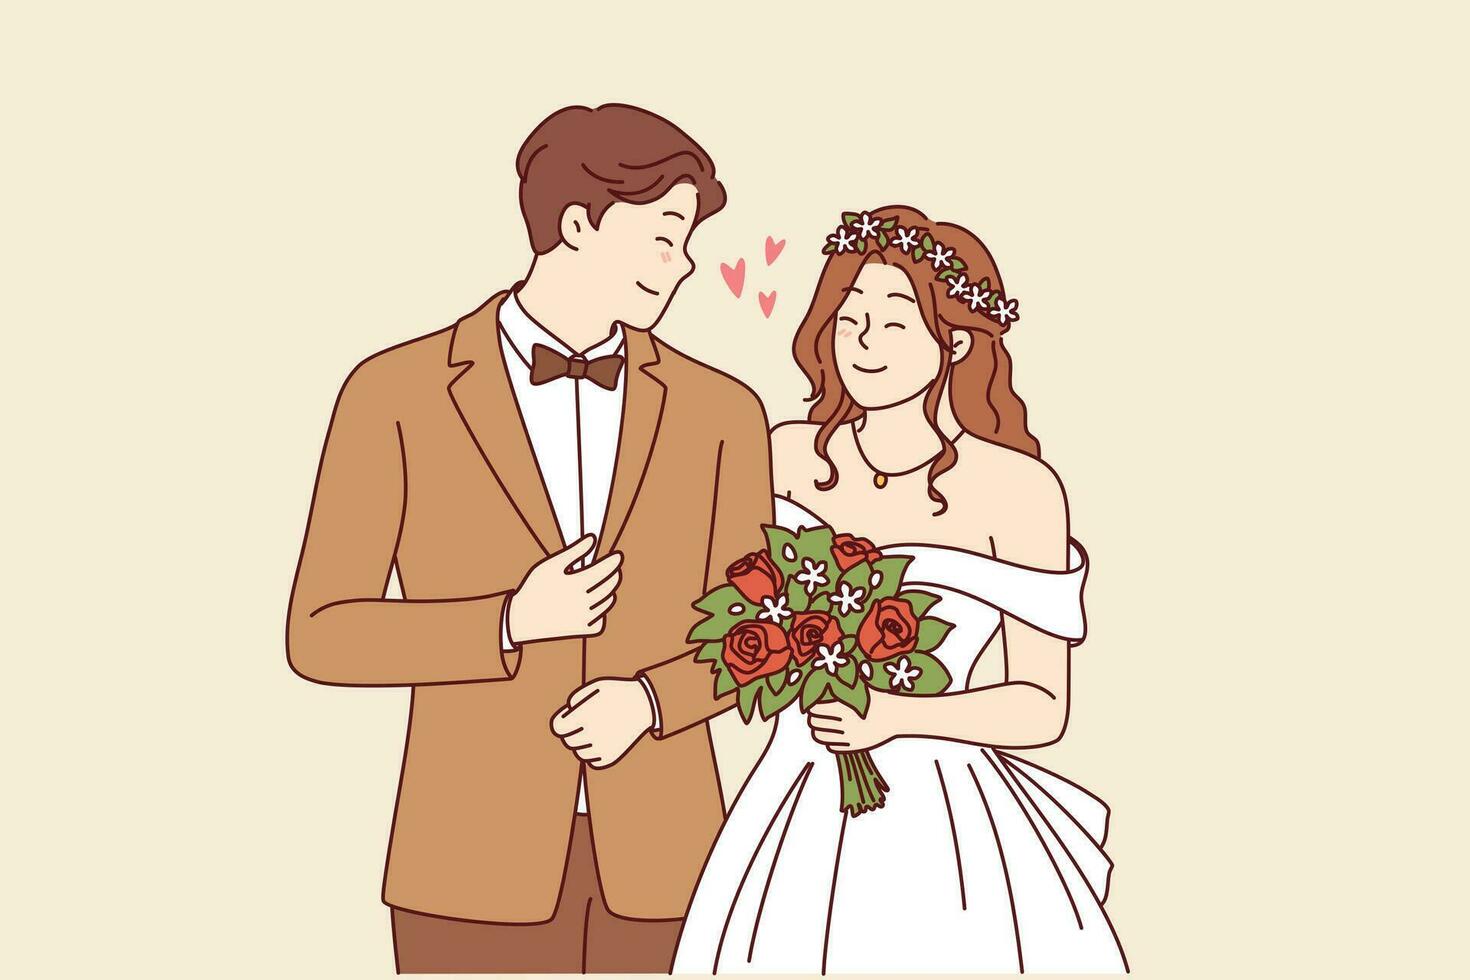 Wedding ceremony at bride and groom in beautiful outfits holding hands during engagement in church. Woman with bouquet flowers stands near husband at wedding ceremony, posing together for family photo vector